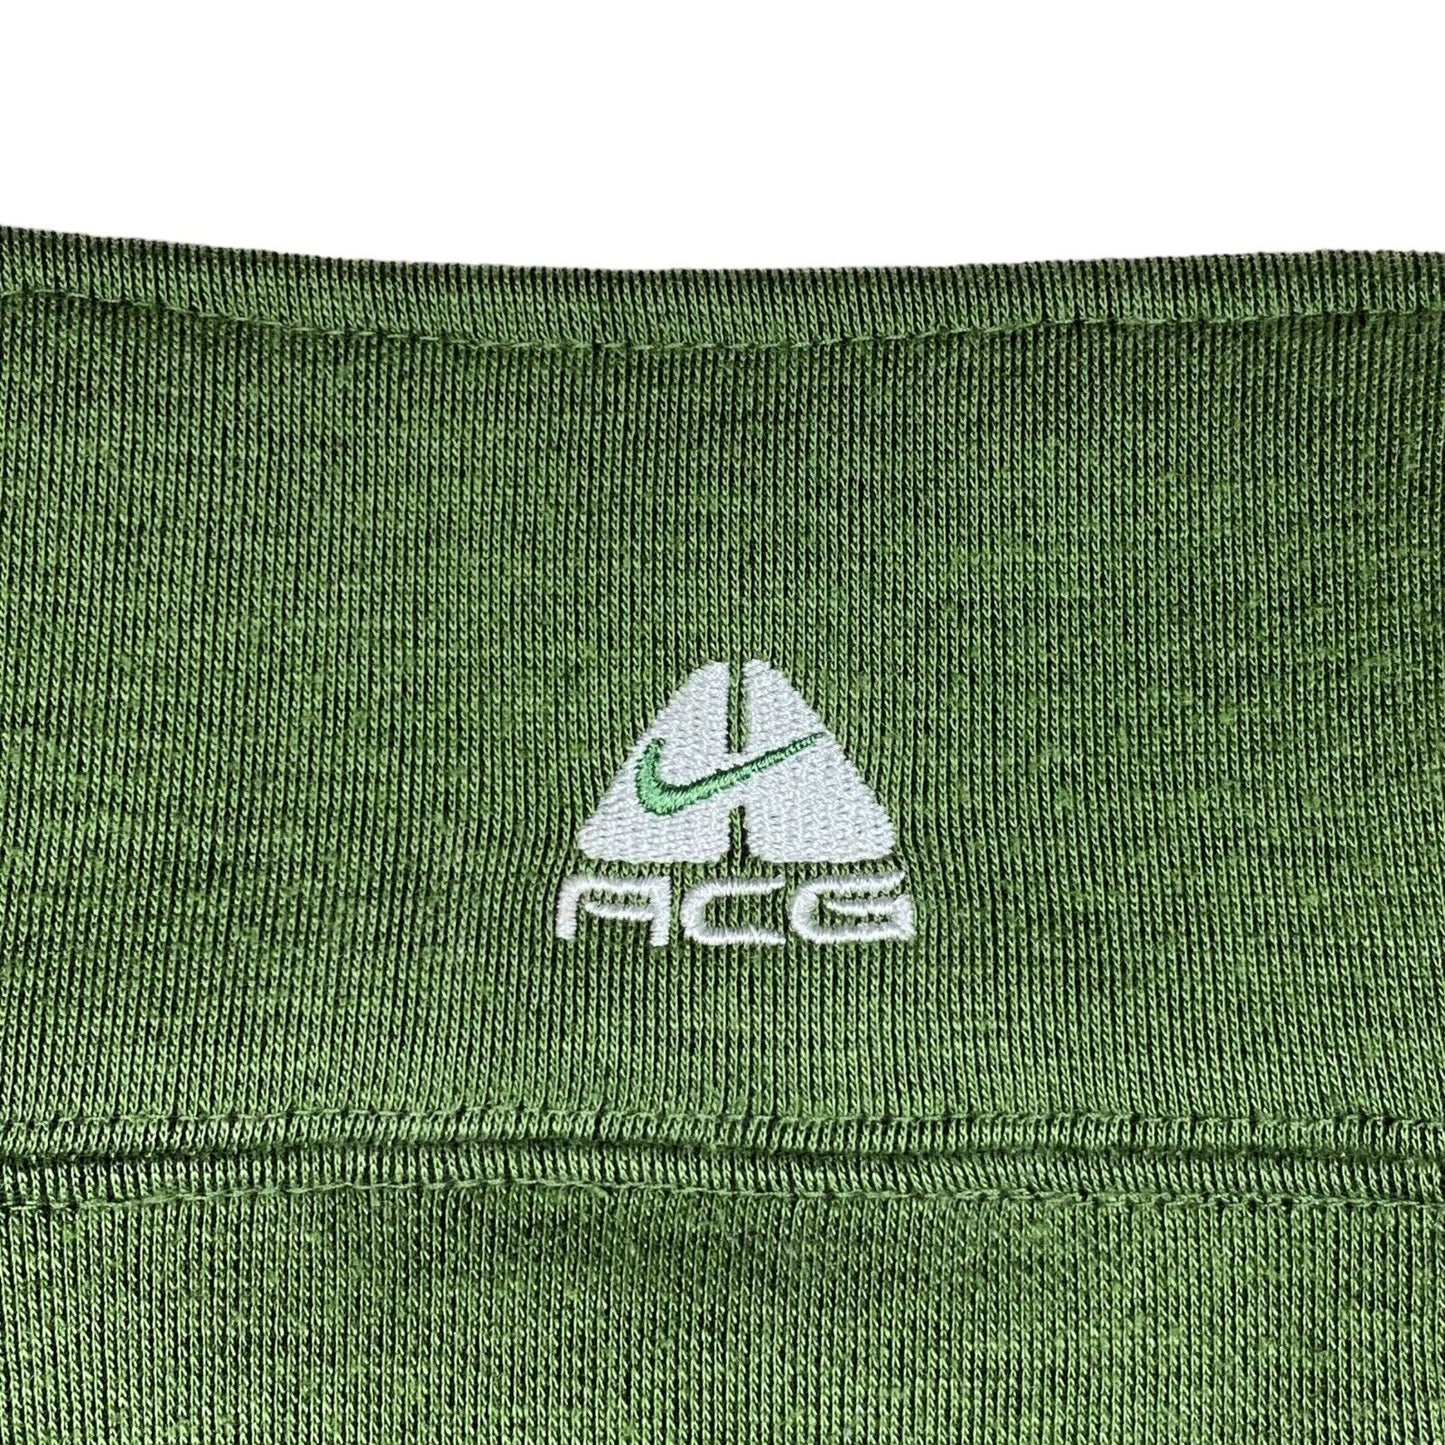 Nike Acg All Conditions Gear Green Zip Up Jacket